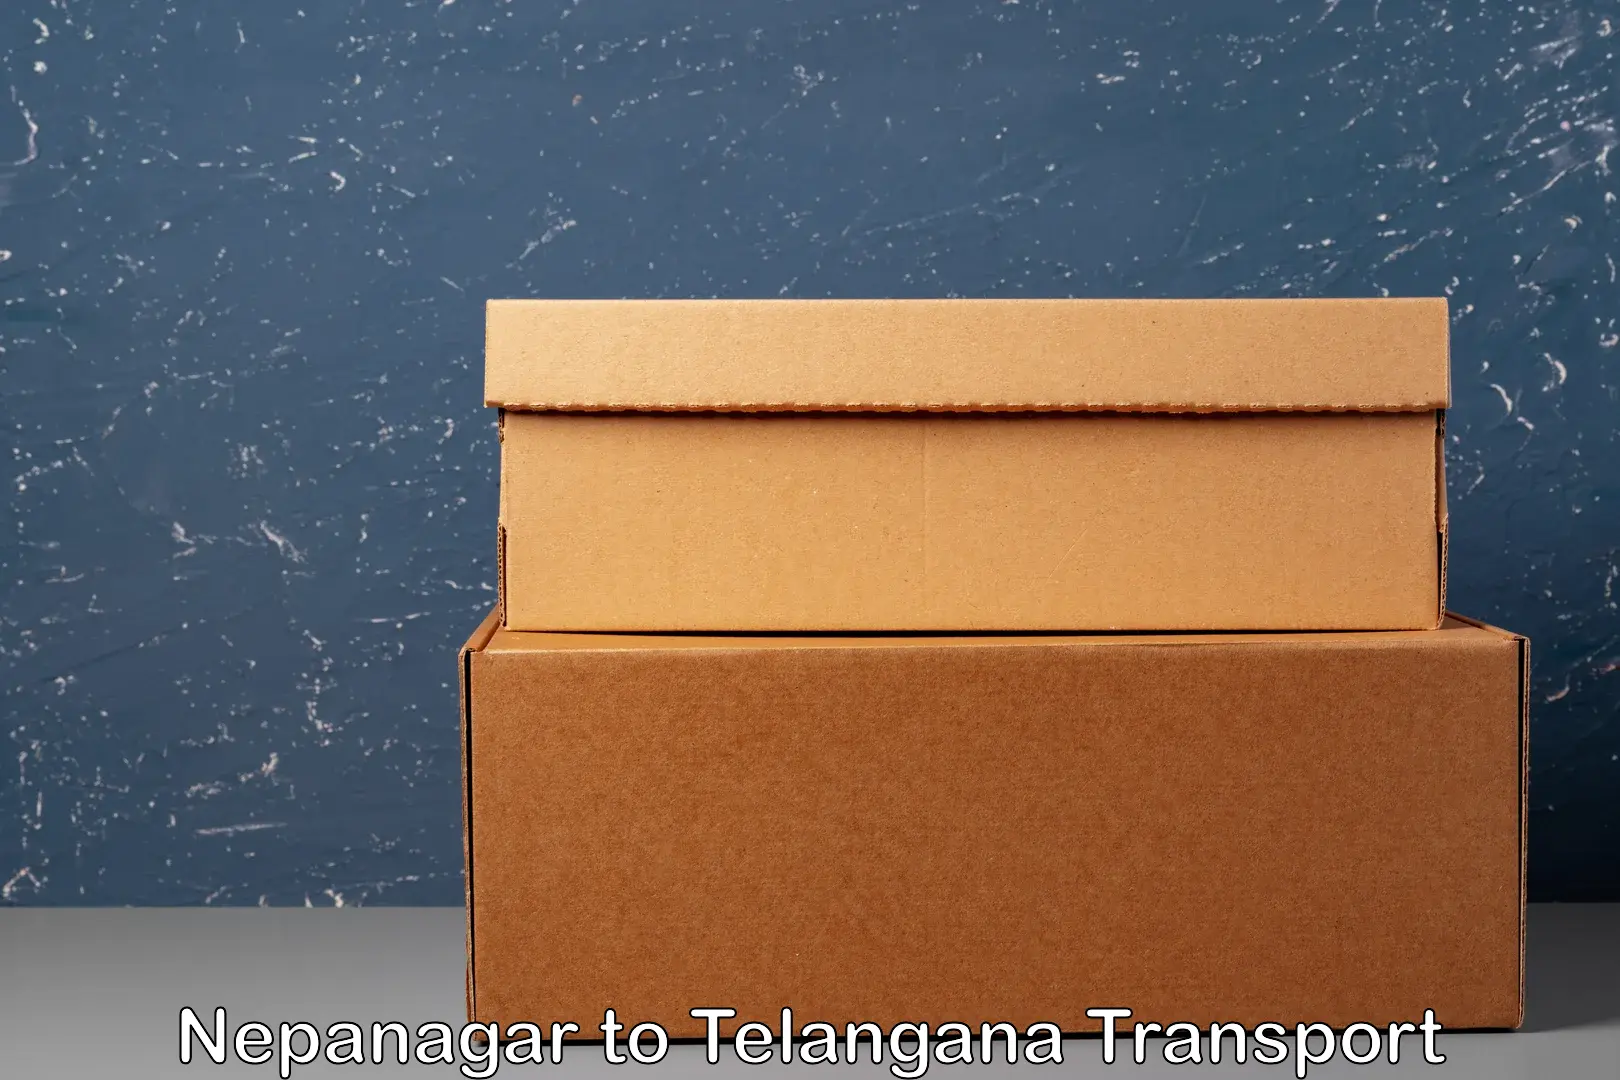 Air freight transport services in Nepanagar to Chevella